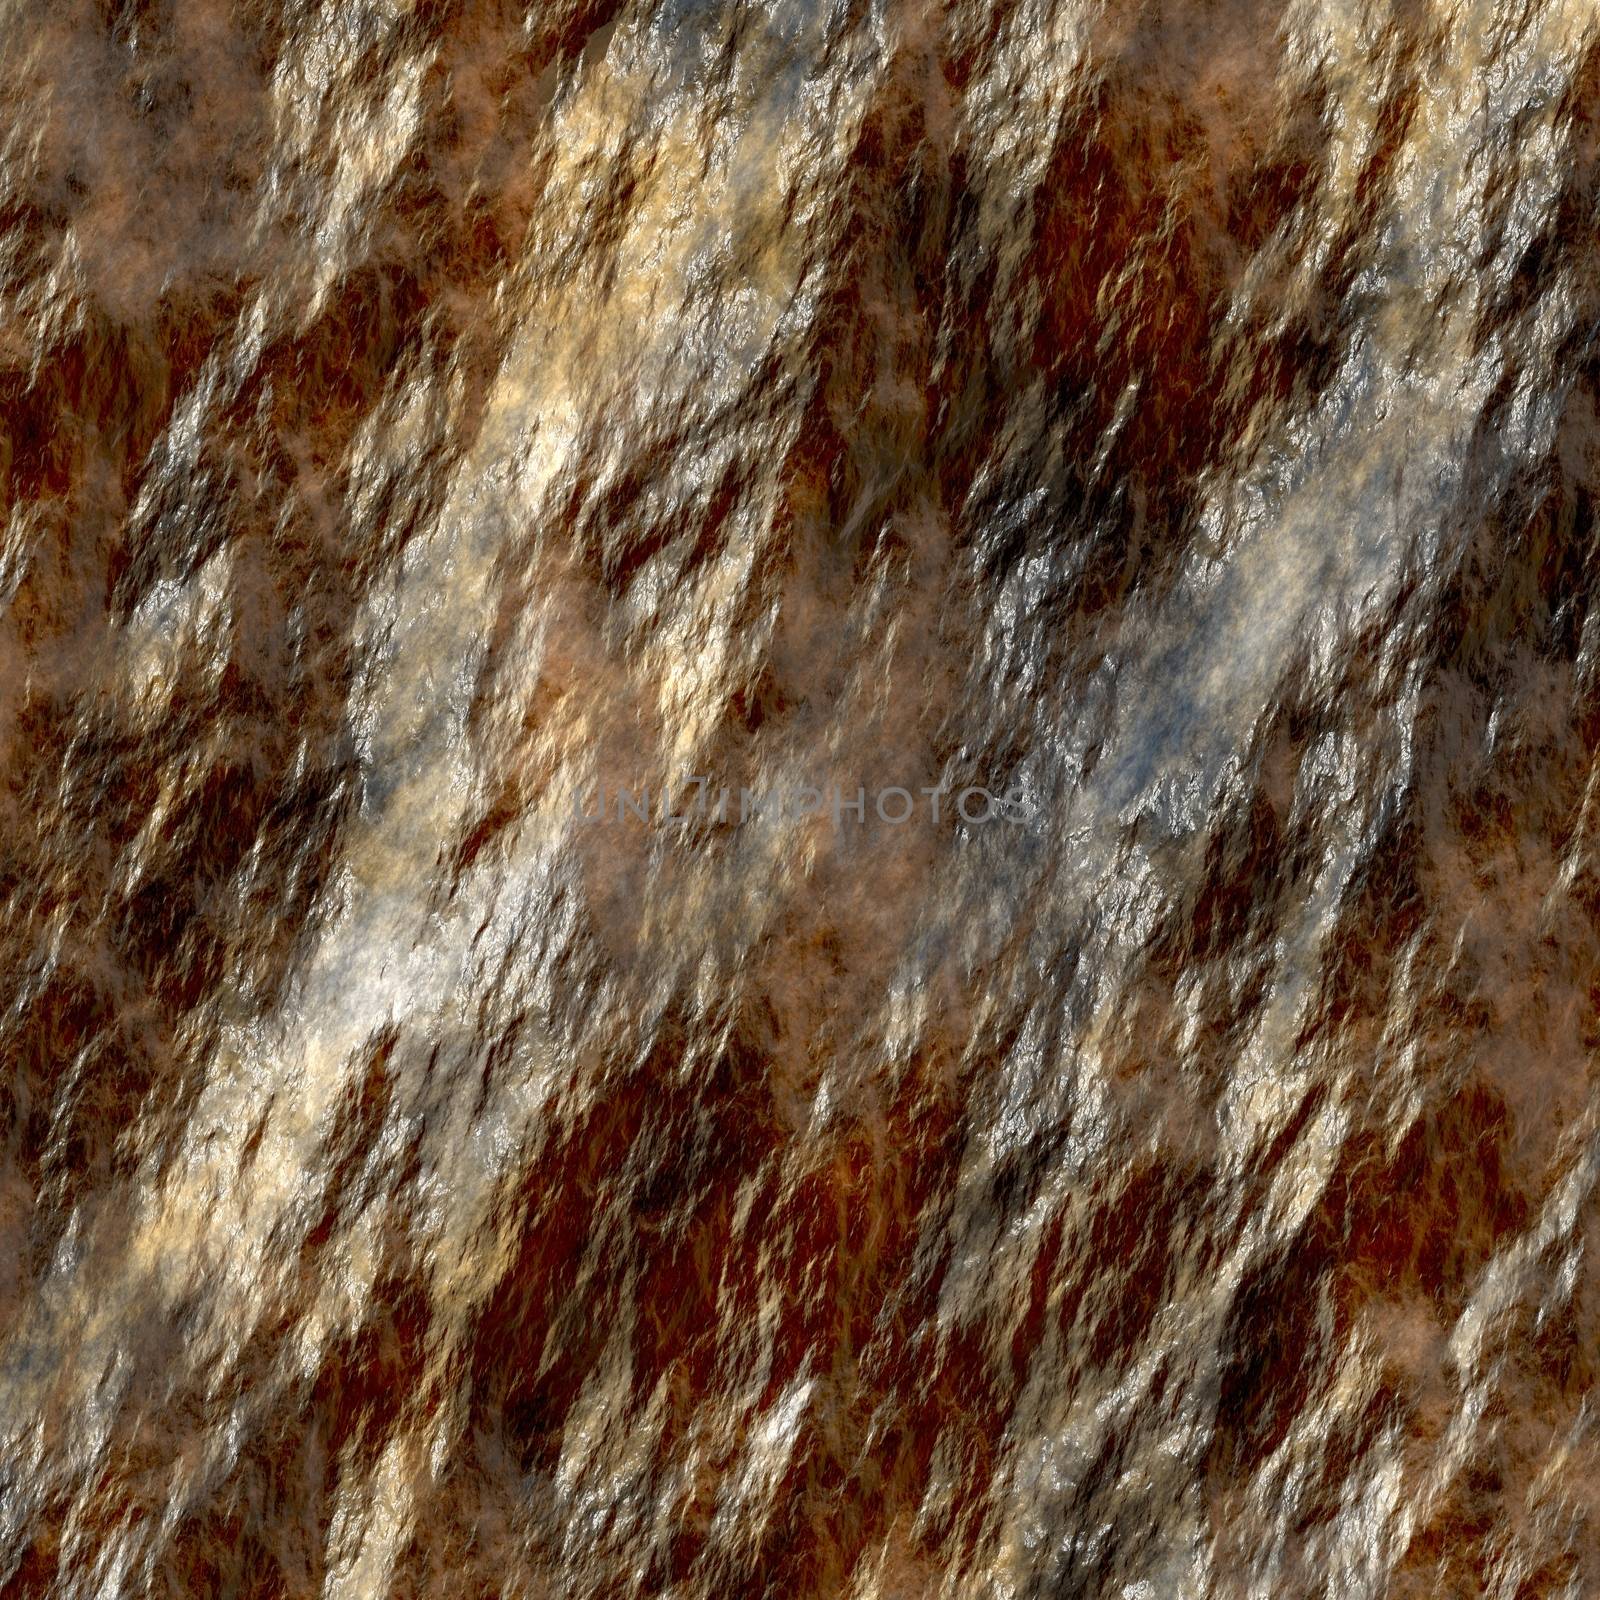 Wet rock surface for background